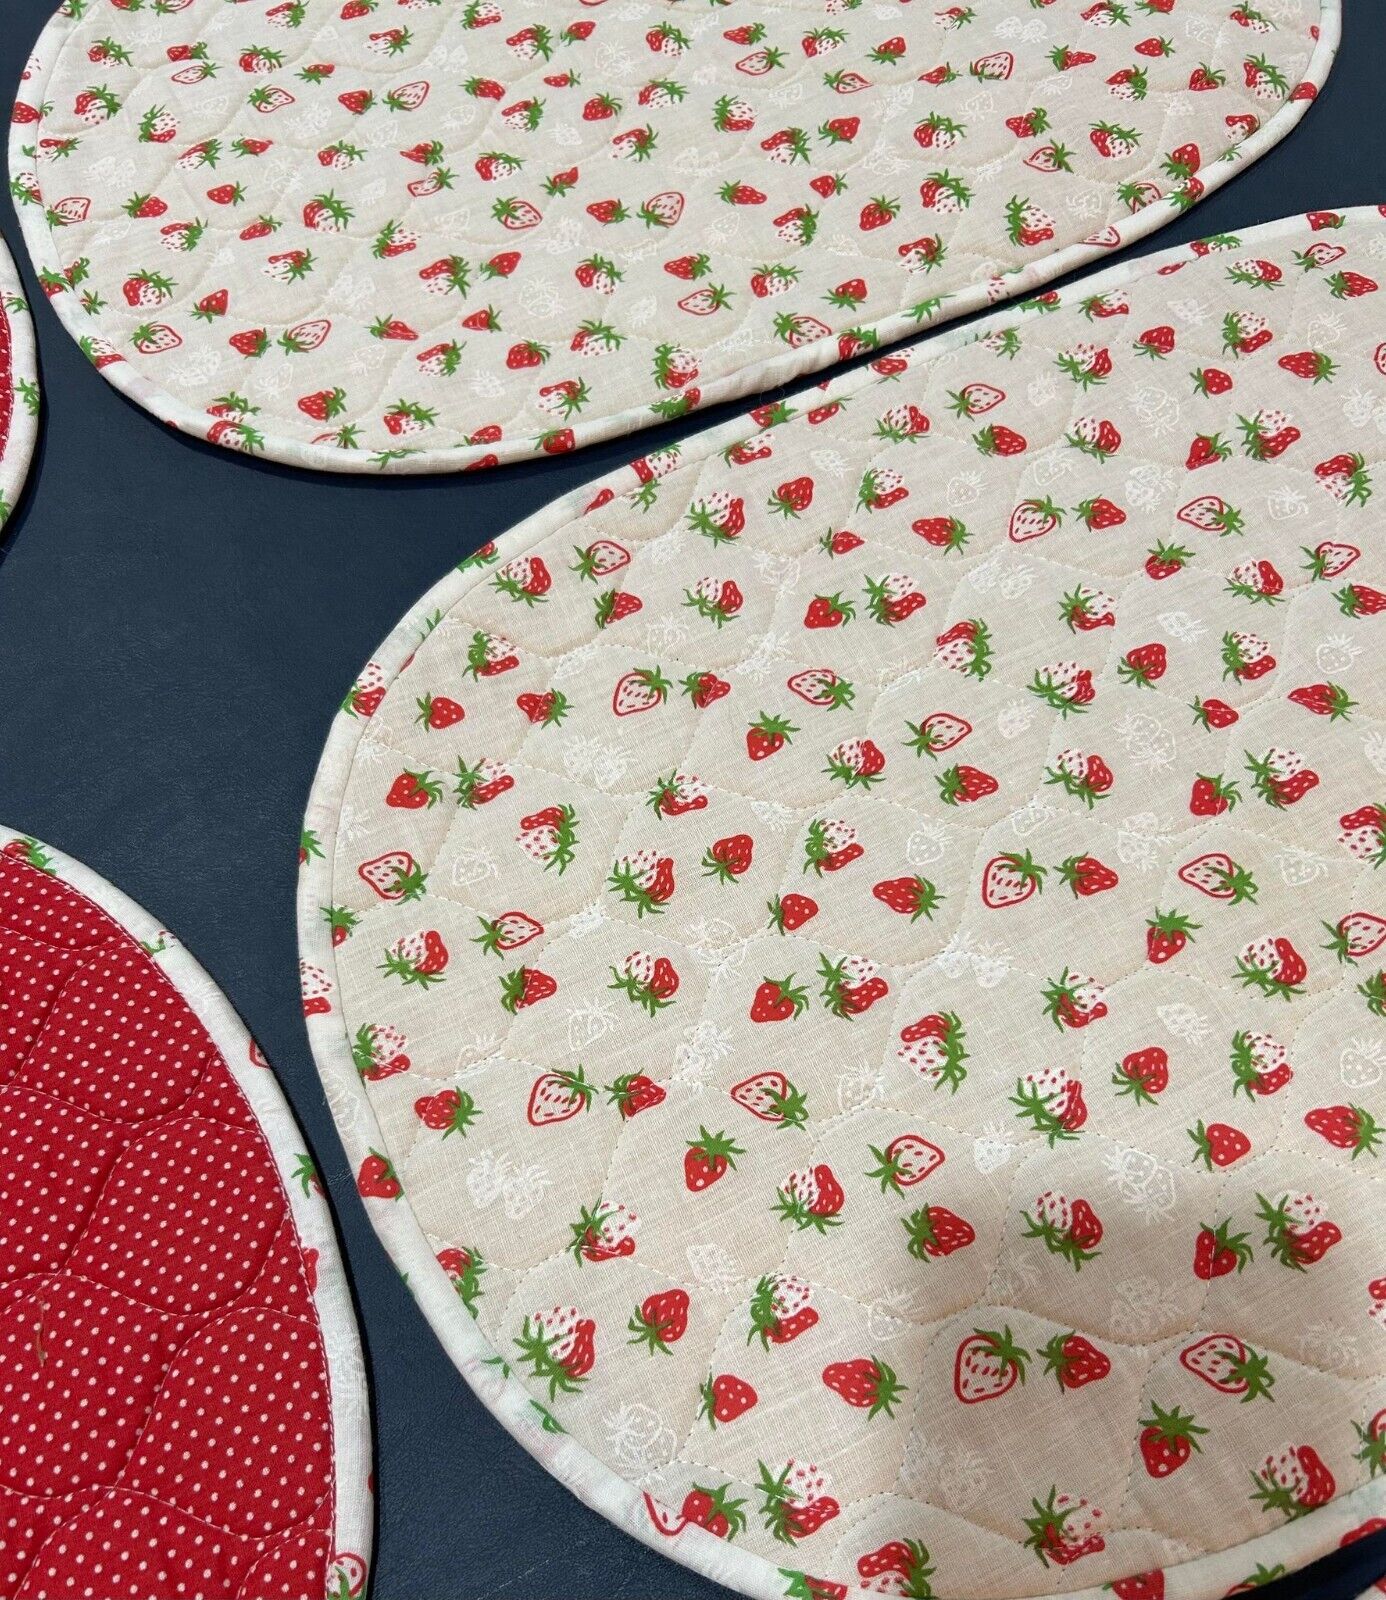 SET (6) Vintage Strawberry Polkadot Quilted Placements Retro Cottage Reversible